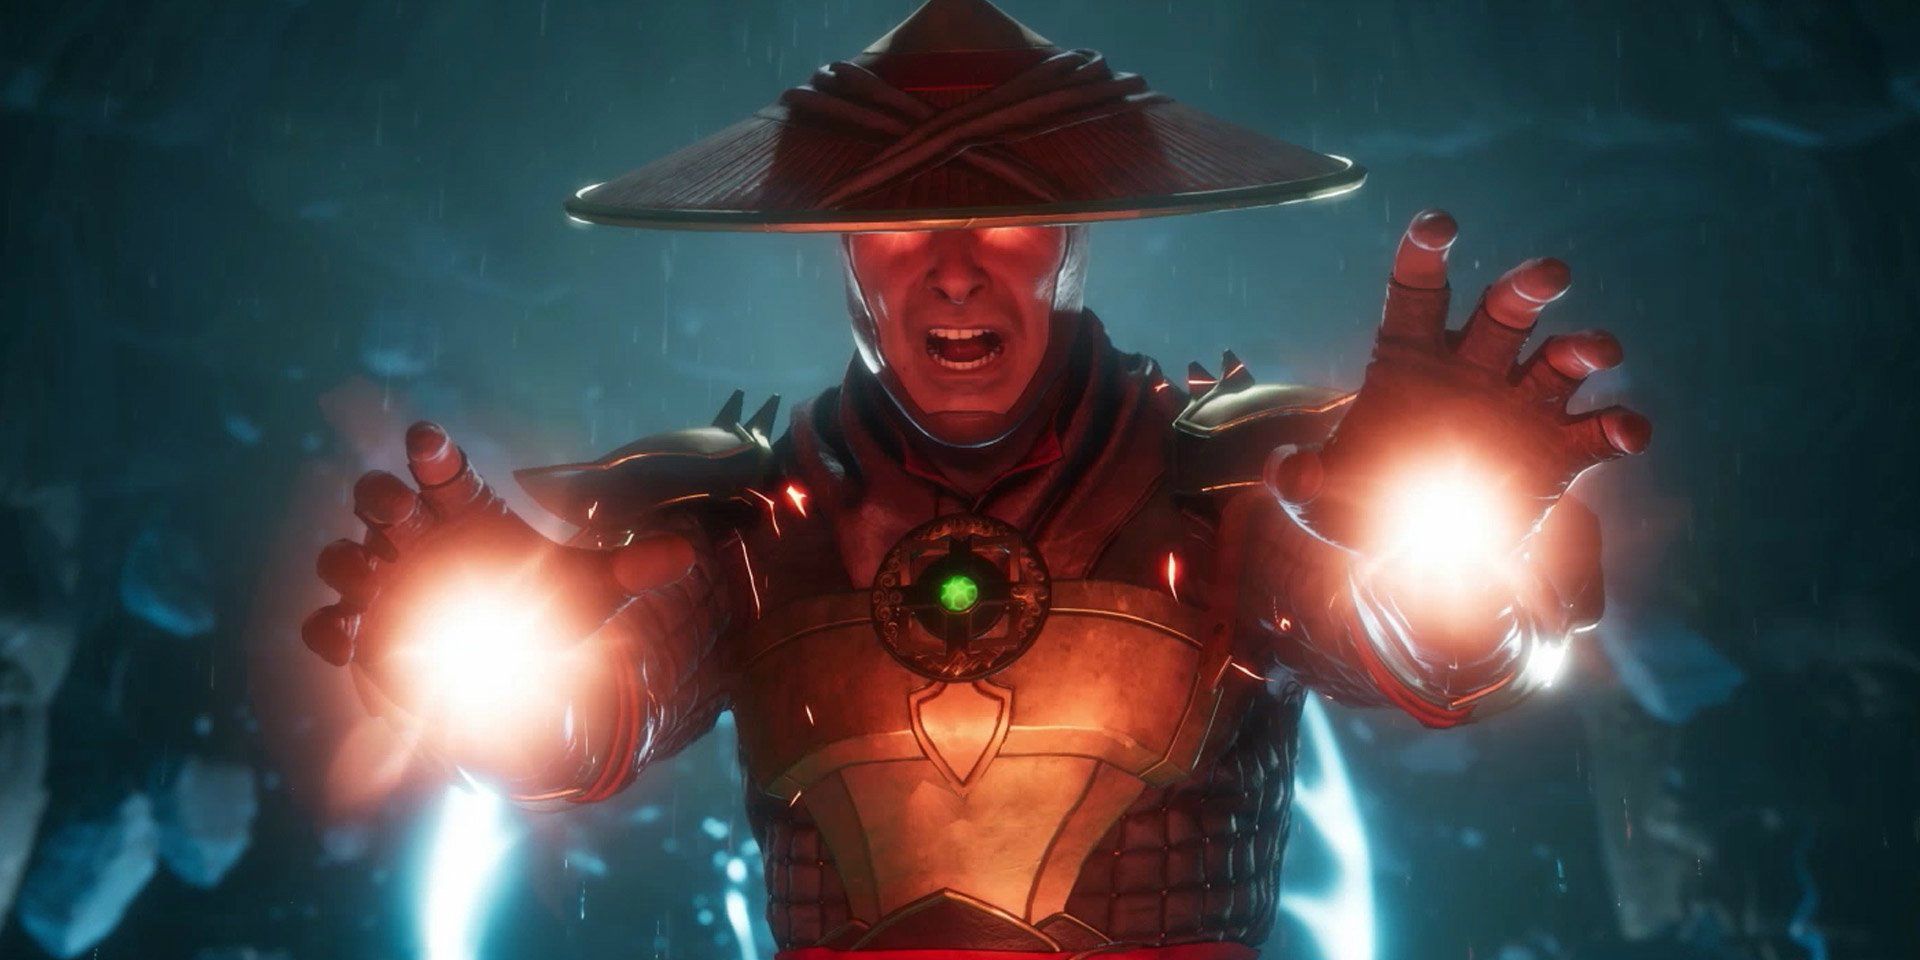 Mortal Kombat 11 Ending Explained (& How To Get All THREE Endings)